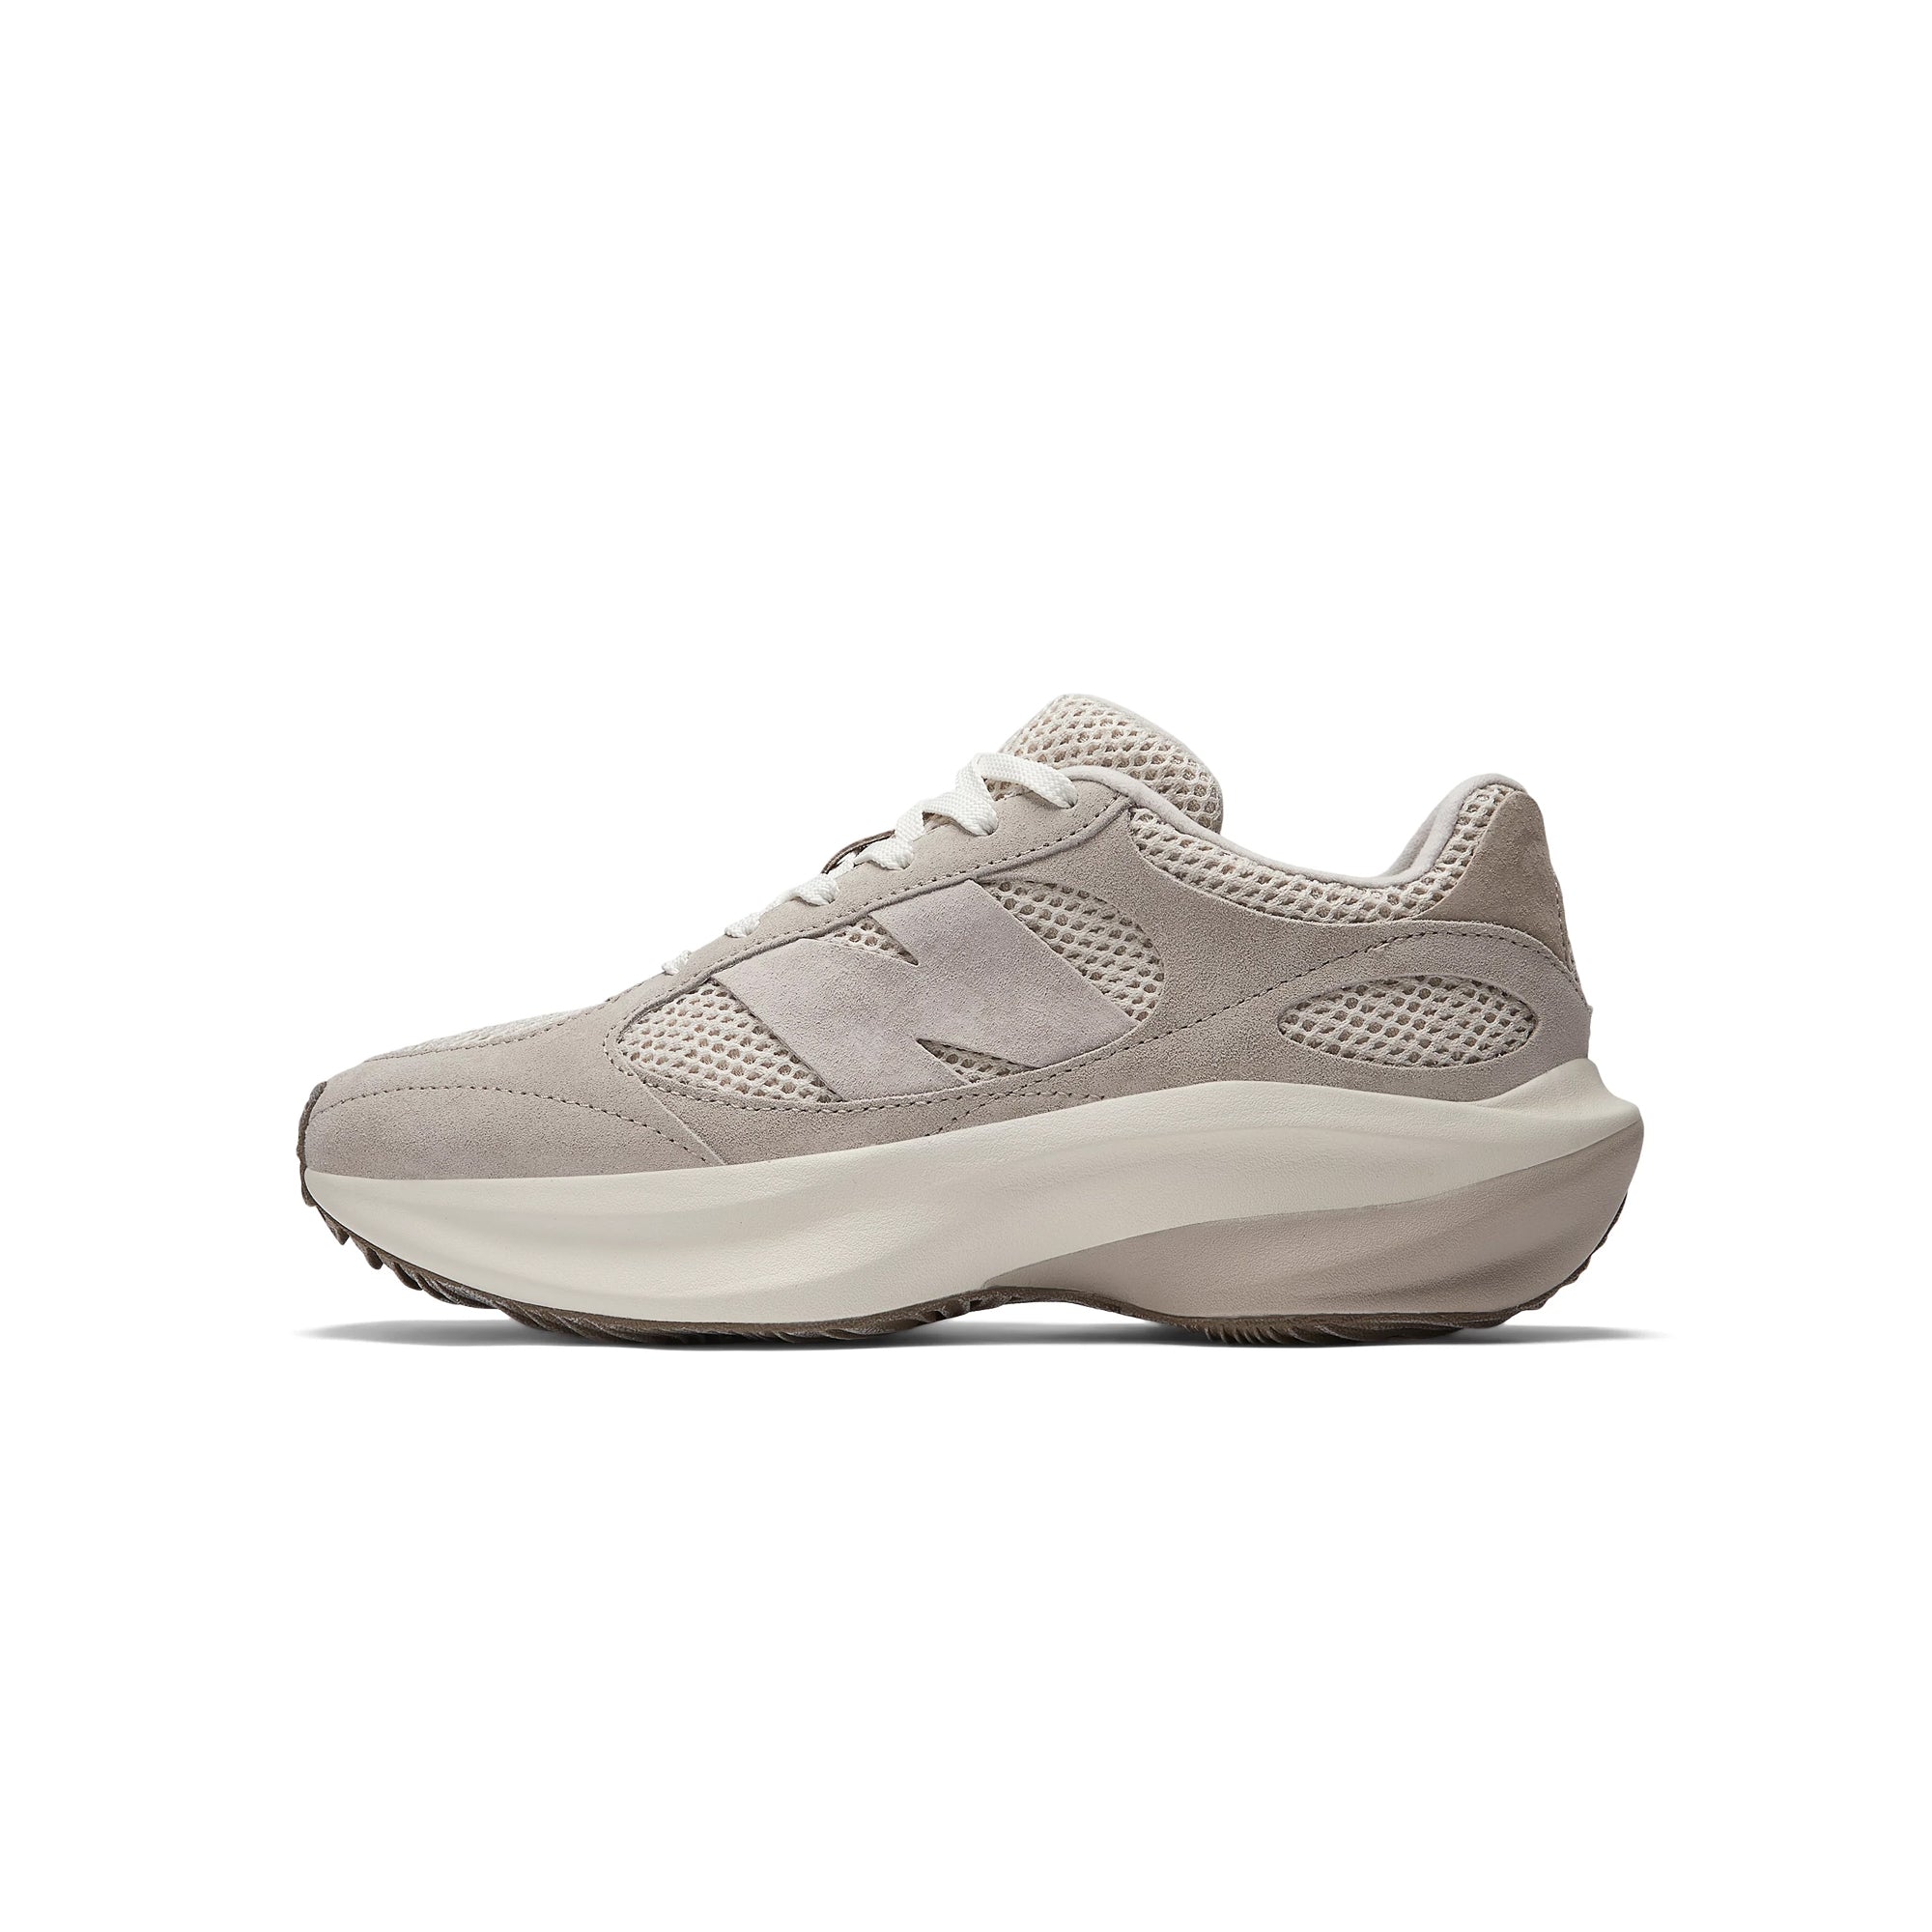 New Balance WRPD Runner "Grey Days" Shoes card image